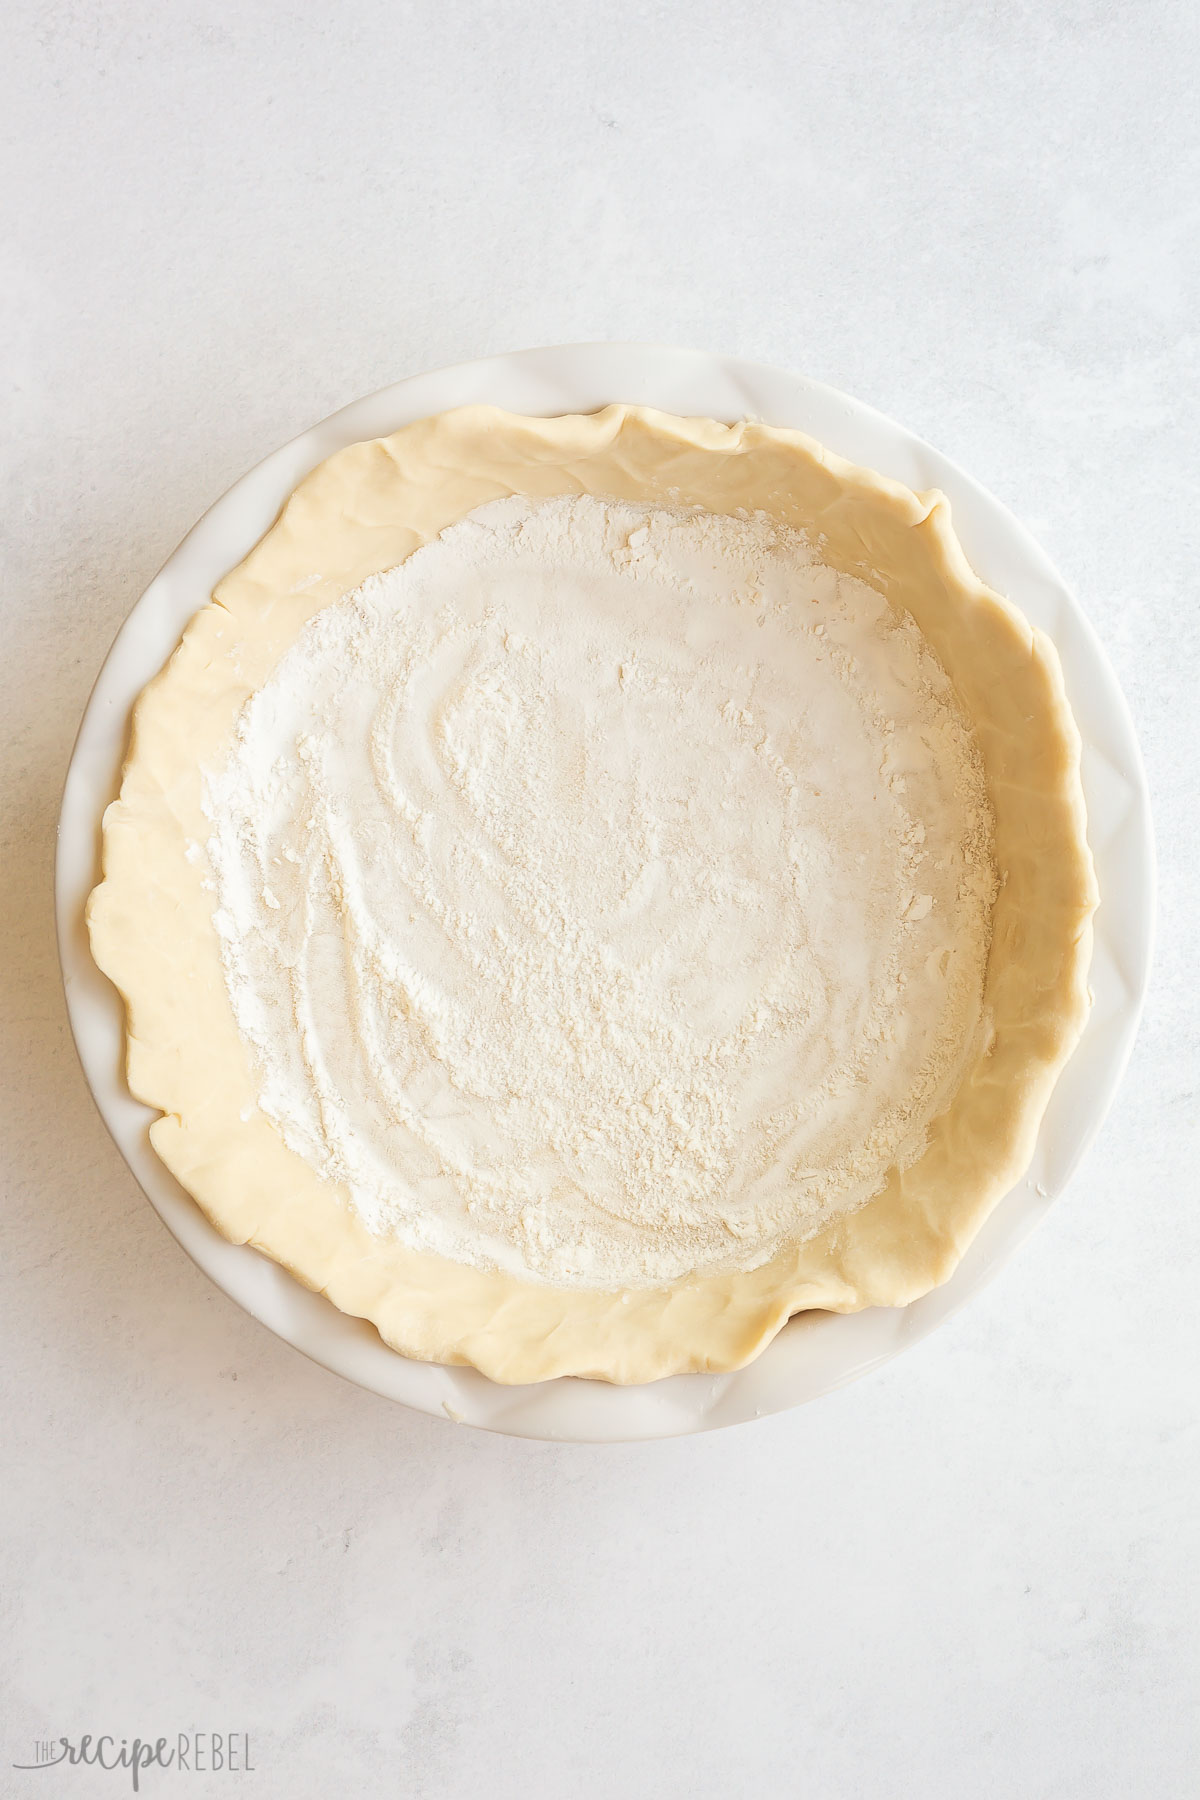 unbaked pie crust with flour sprinkled in the bottom.